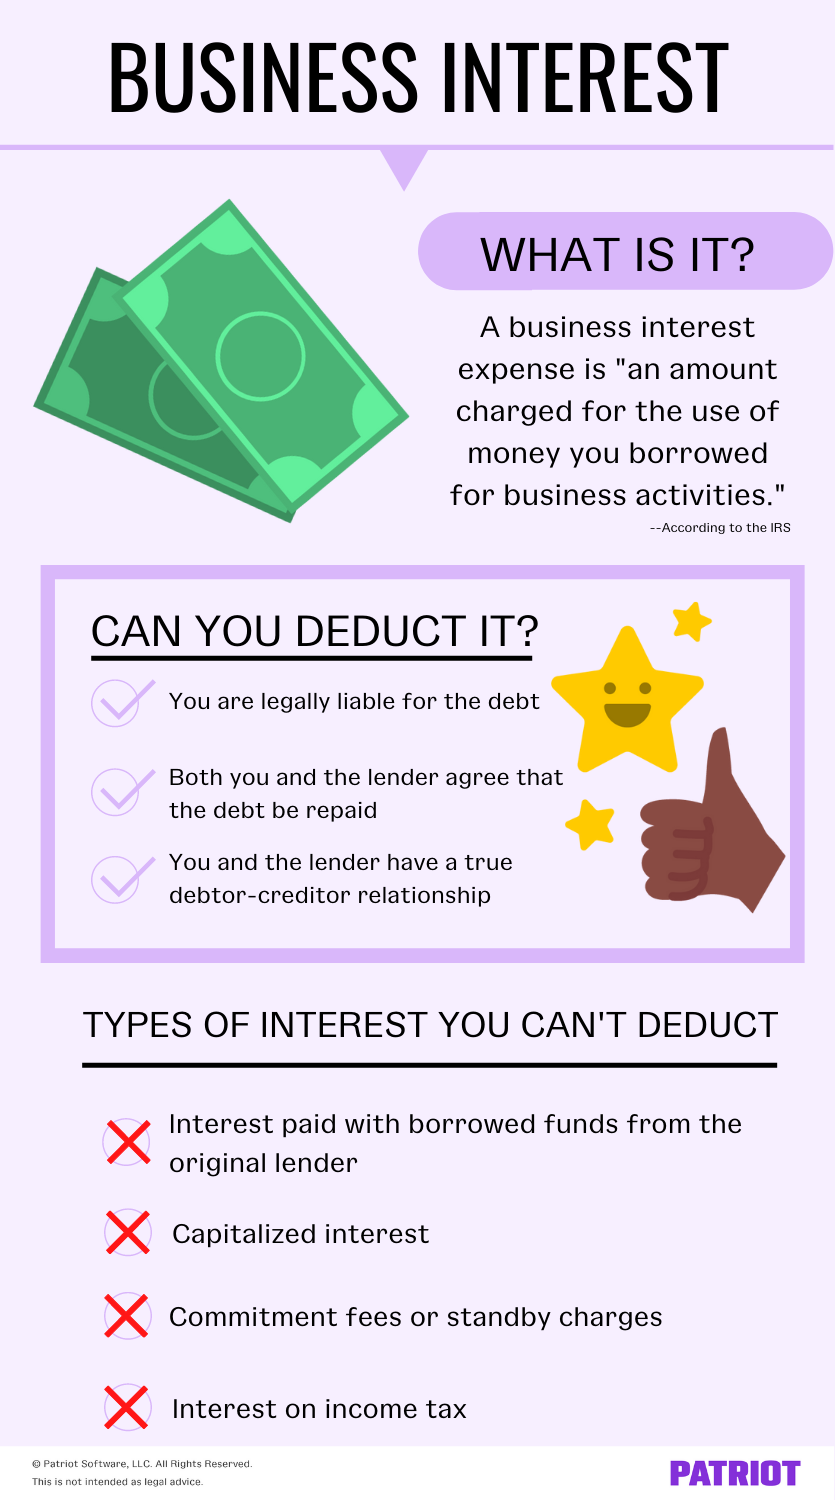 business interest infographic going over definition, whether you can deduct it, and types of interest you cannot deduct